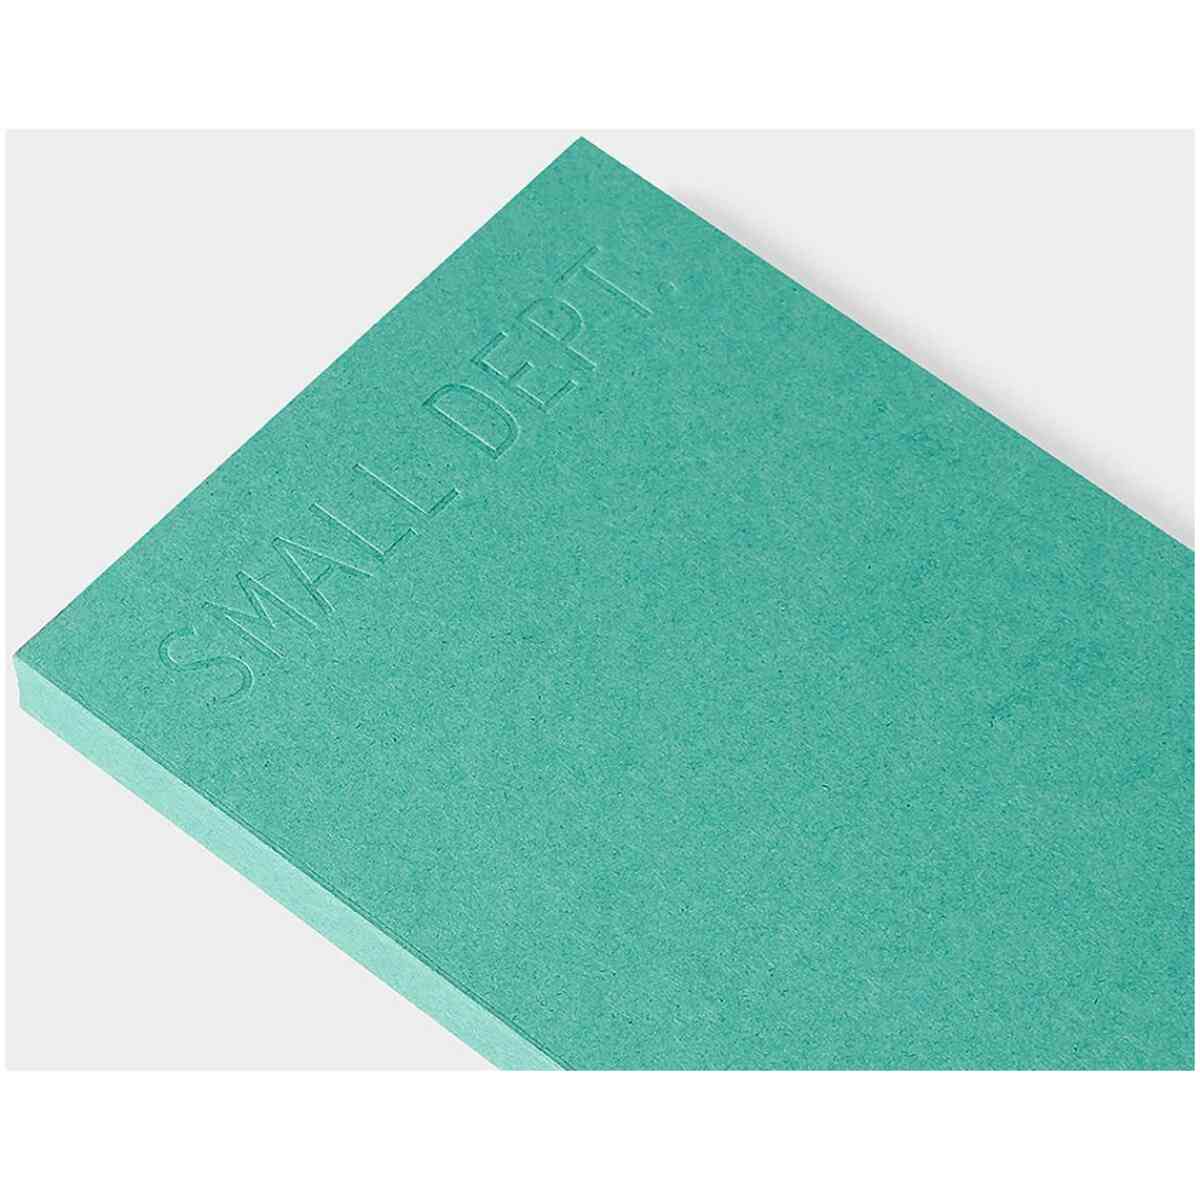 small dept weekly planner emerald 2